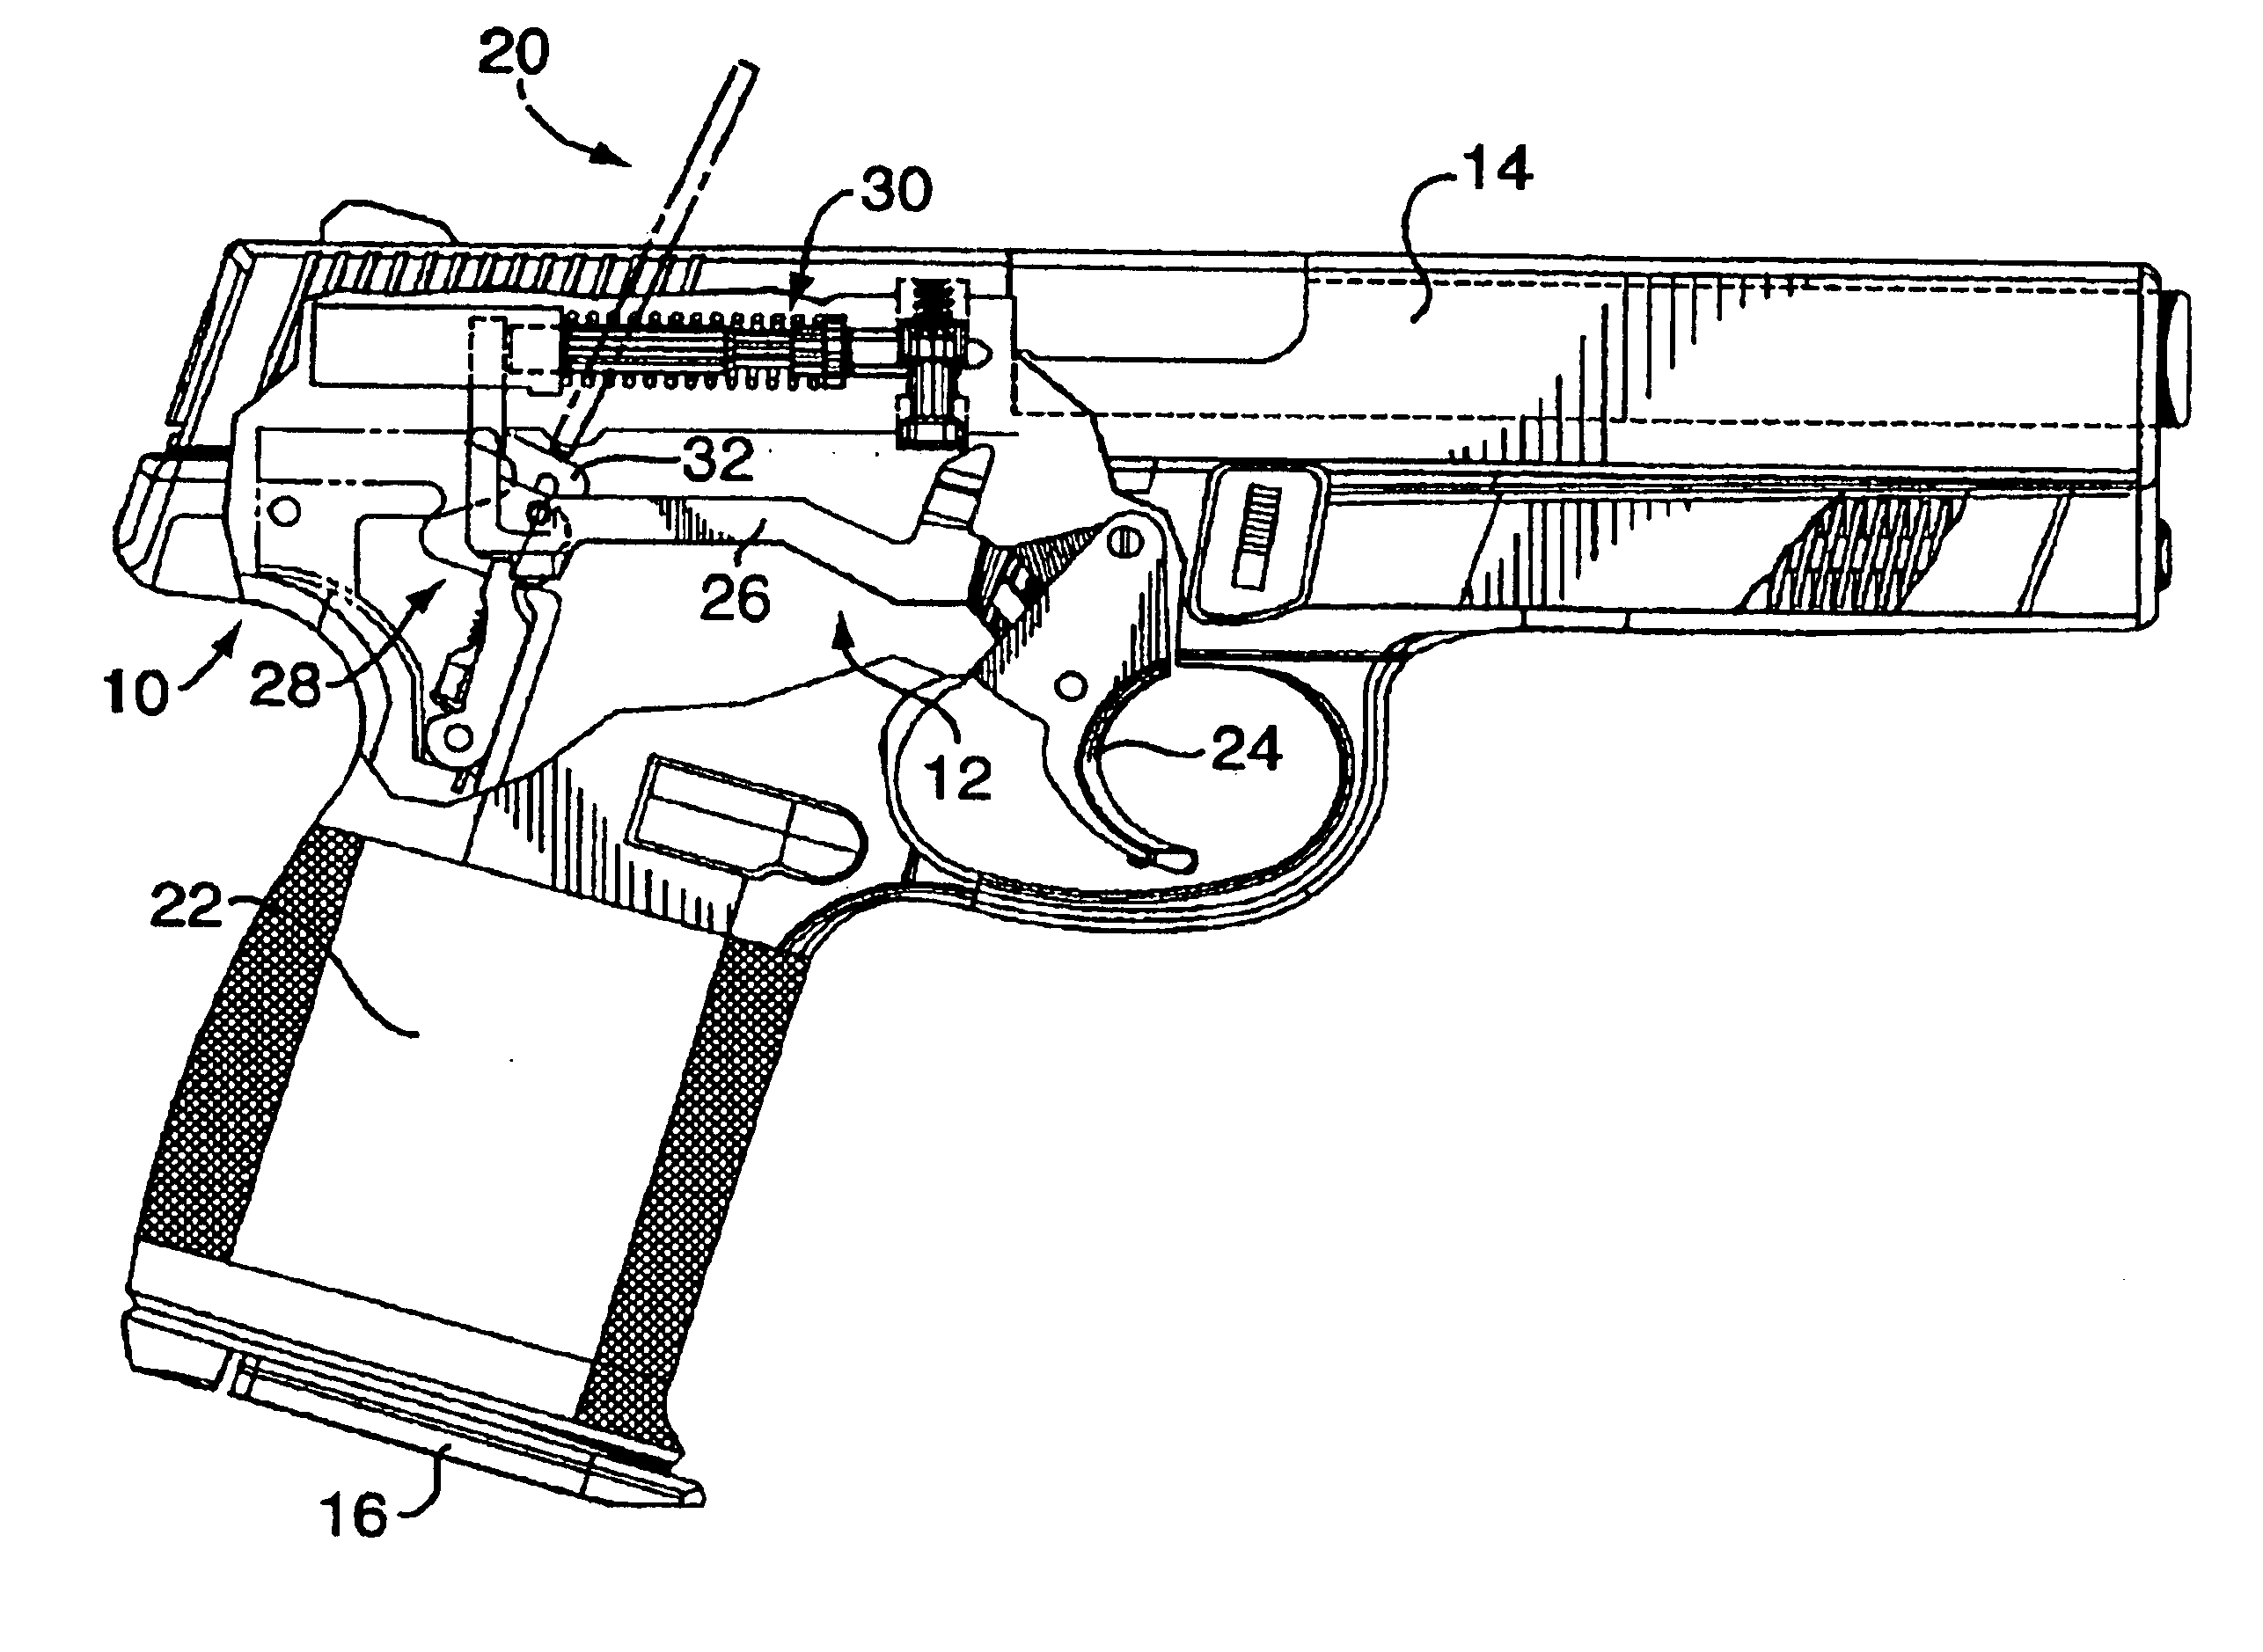 Apparatus and method for removing the slide of a semi-automatic pistol